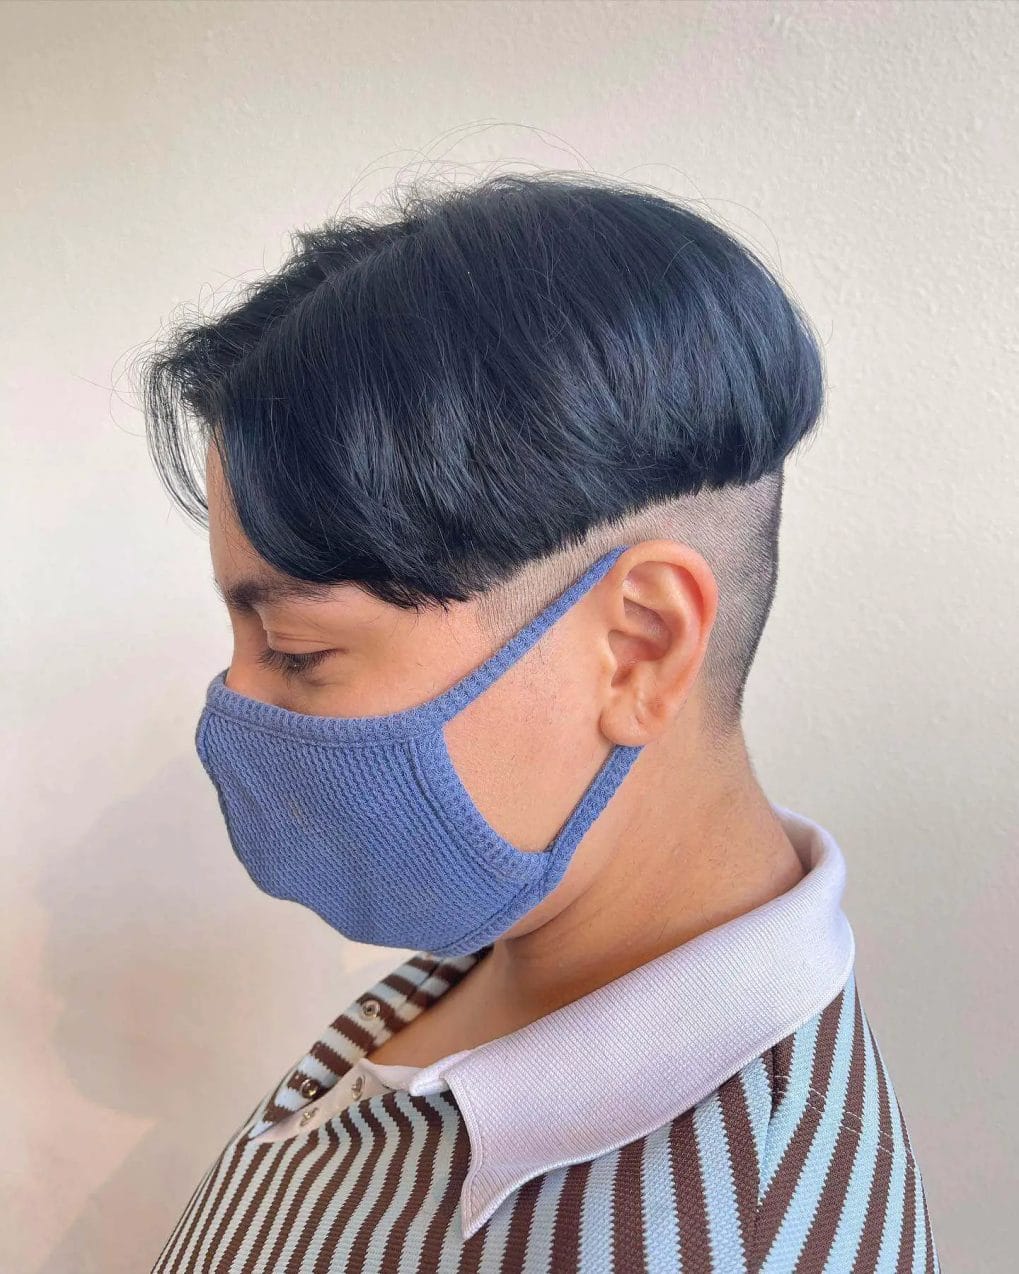 Contemporary slicked-back hairstyle with a deep blue undercut and close-shaved sides.
